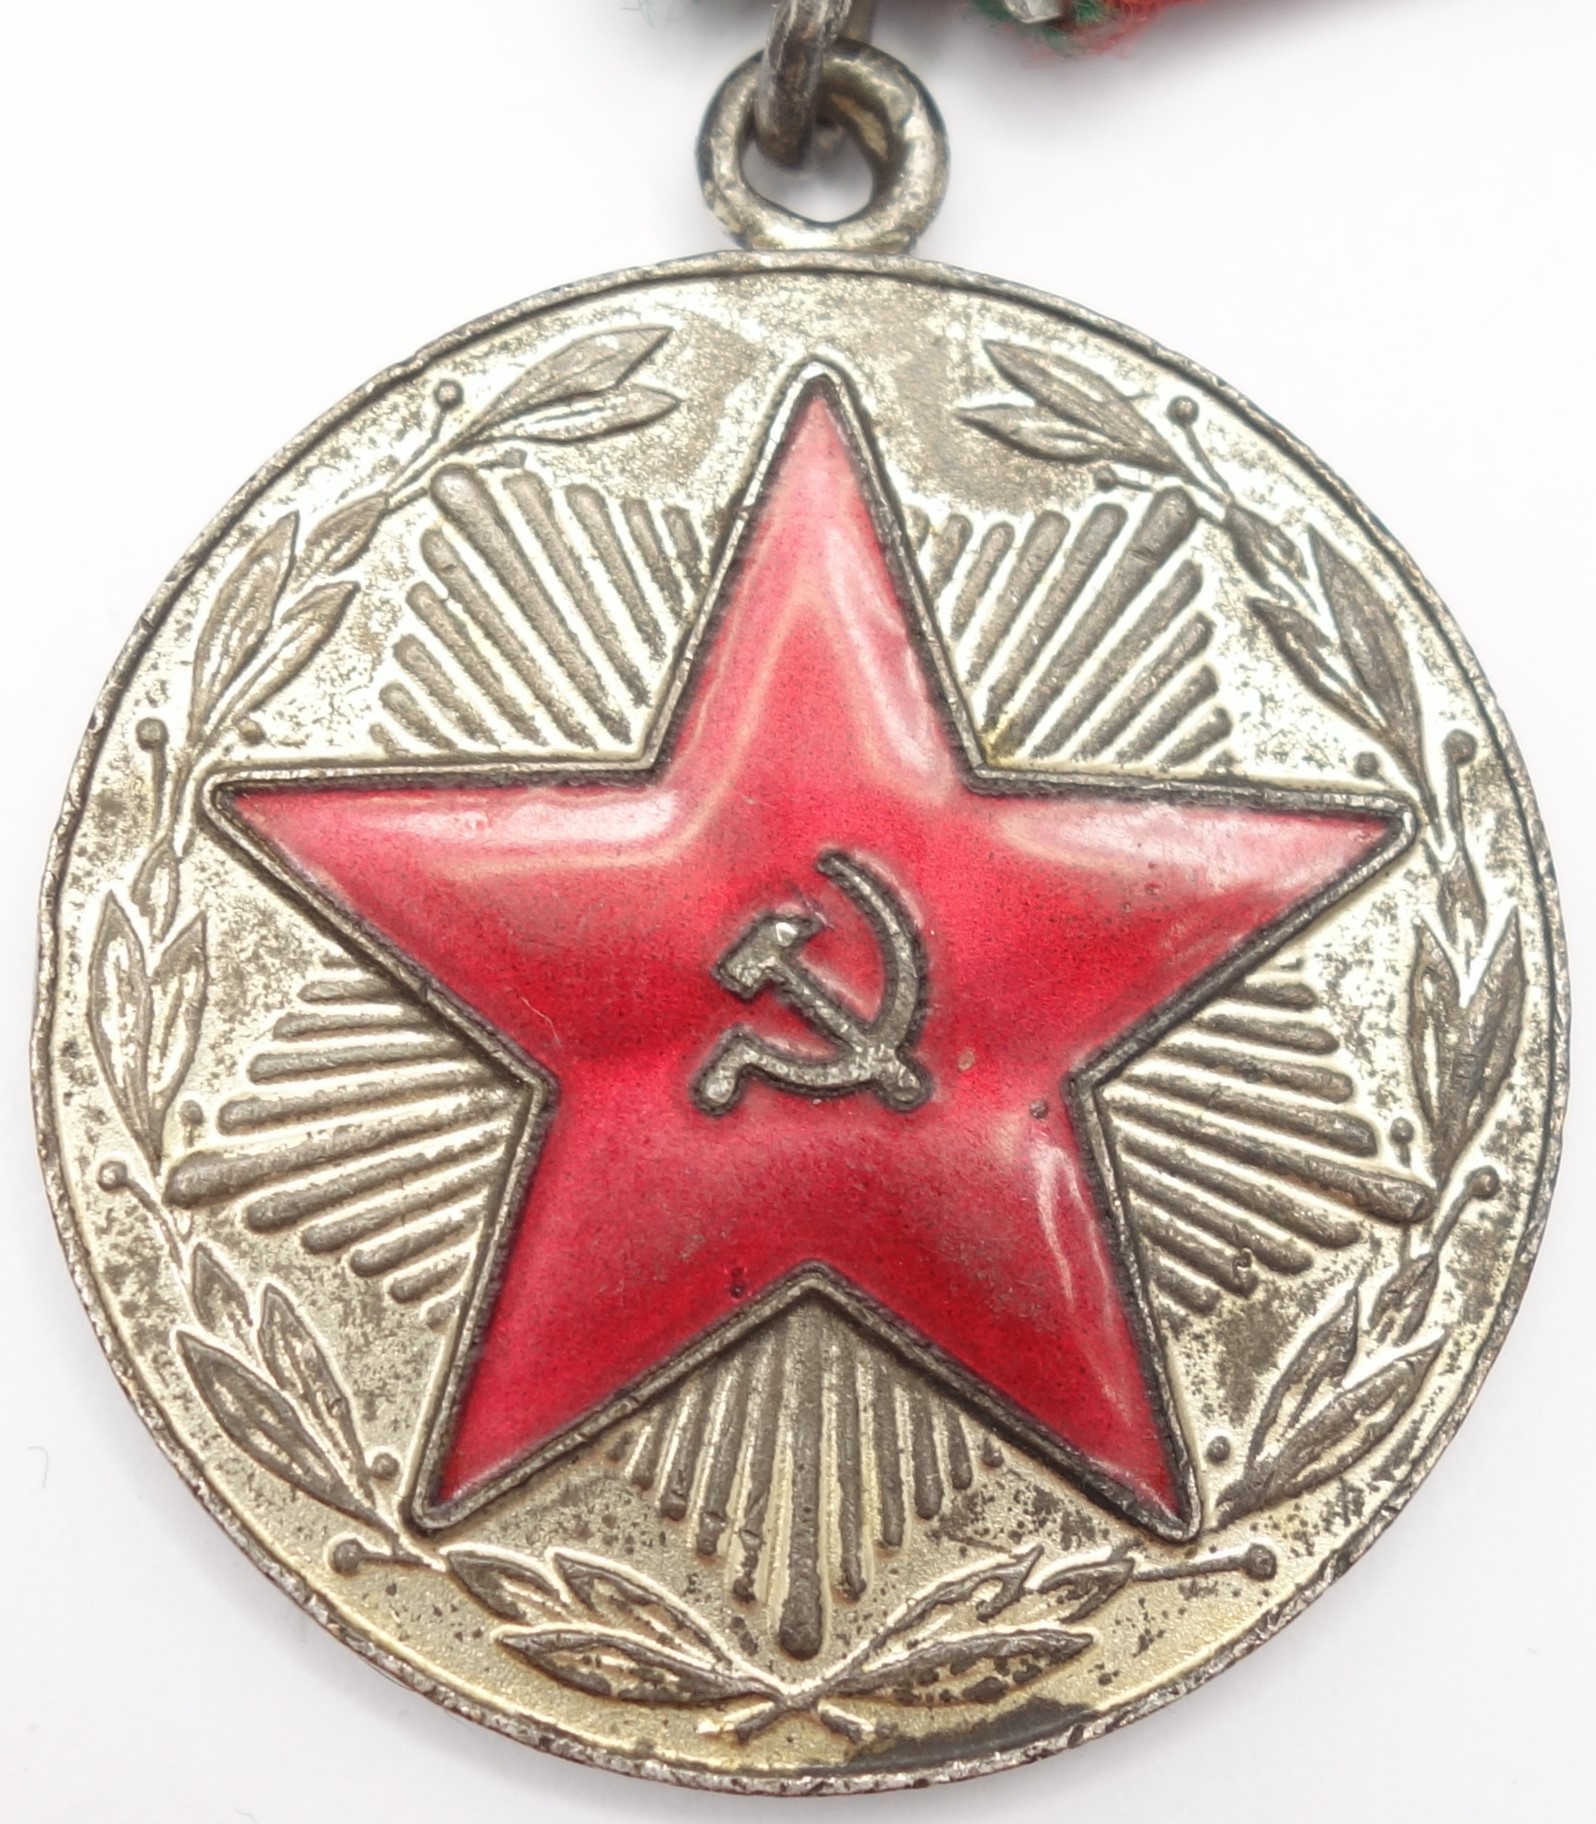 Soviet Medal for Impeccable Service 1st class | Soviet Orders